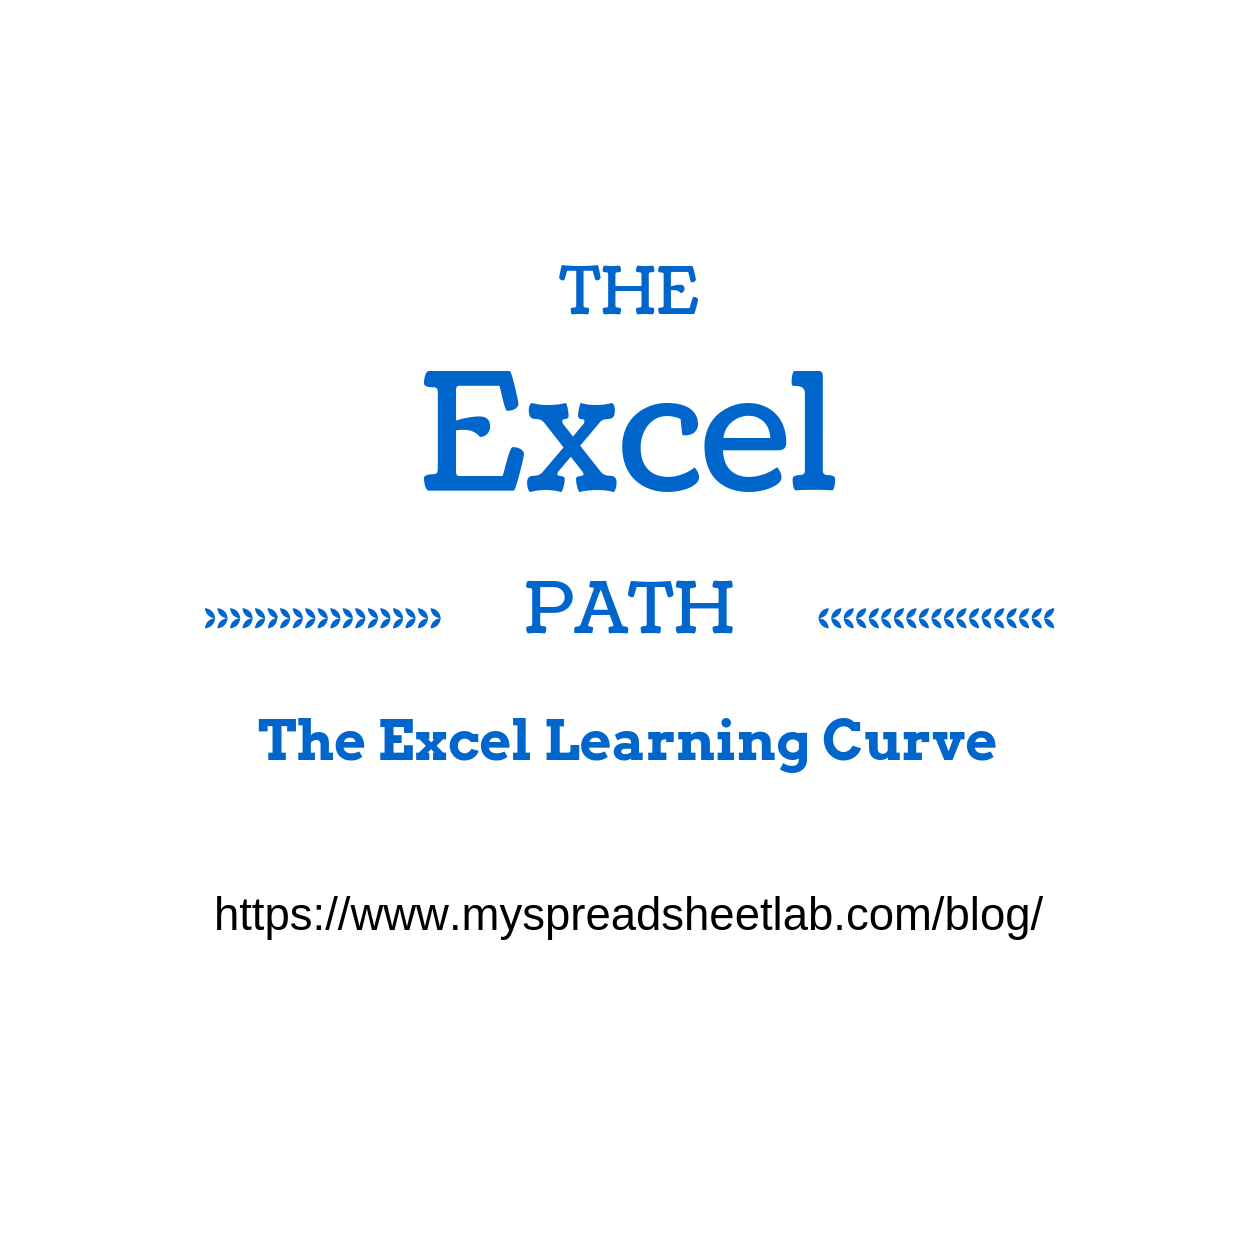 The Learning Curve in Excel